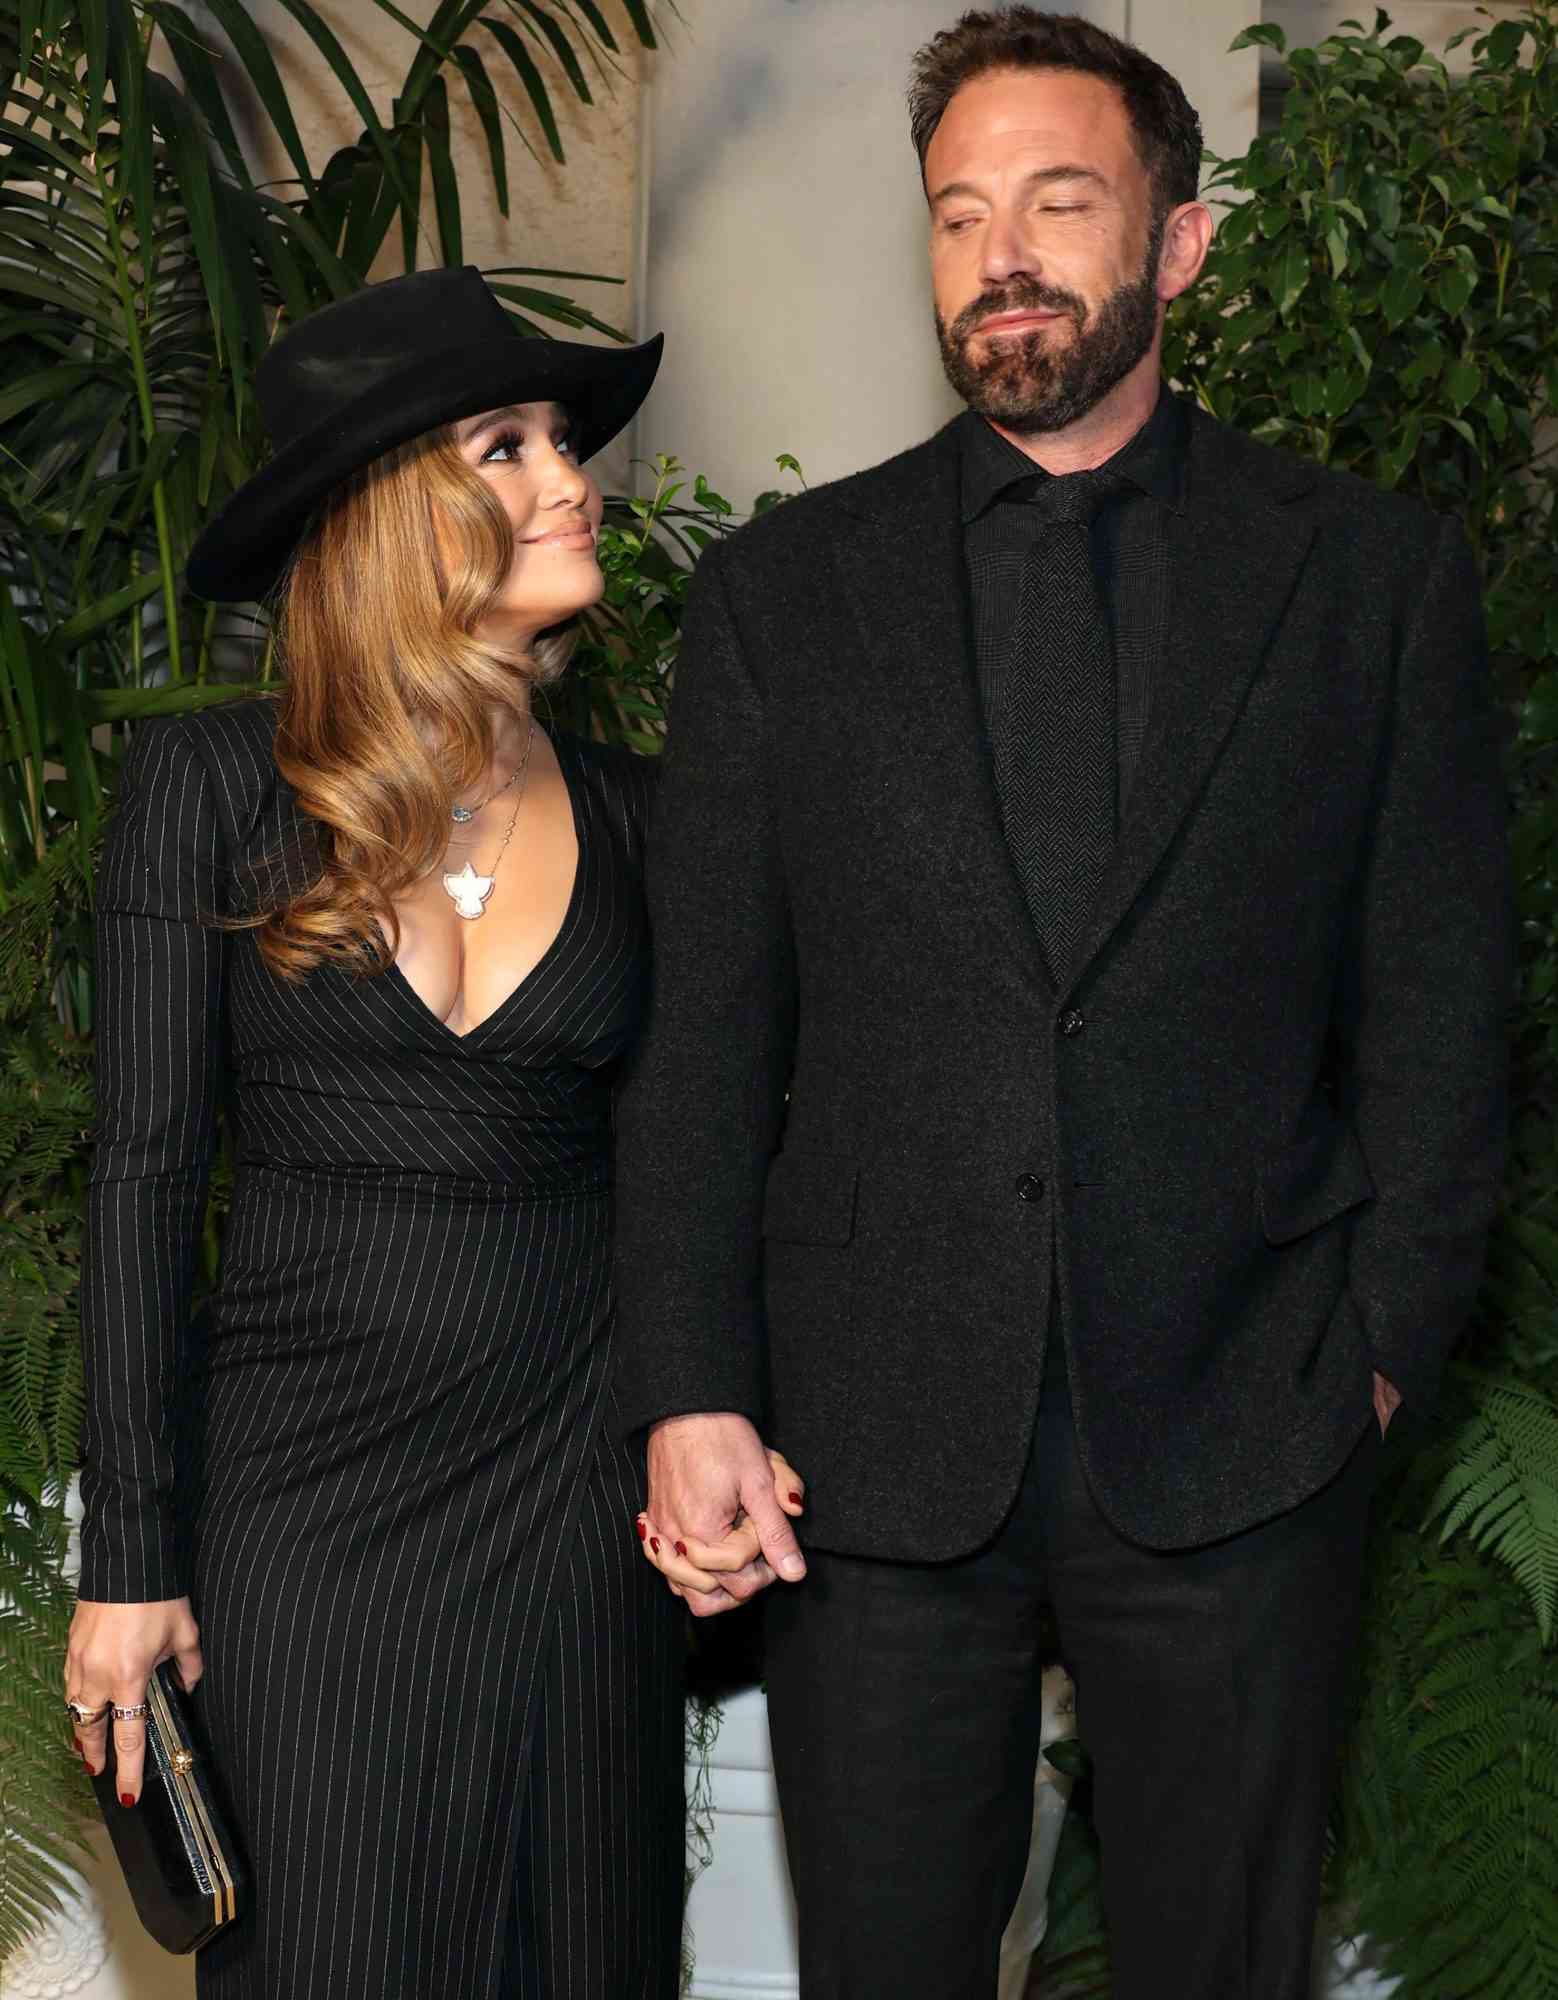 SAN MARINO, CALIFORNIA - OCTOBER 13: (L-R) Jennifer Lopez and Ben Affleck attend the Ralph Lauren SS23 Runway Show at The Huntington Library, Art Collections, and Botanical Gardens on October 13, 2022 in San Marino, California. (Photo by Amy Sussman/Getty Images)